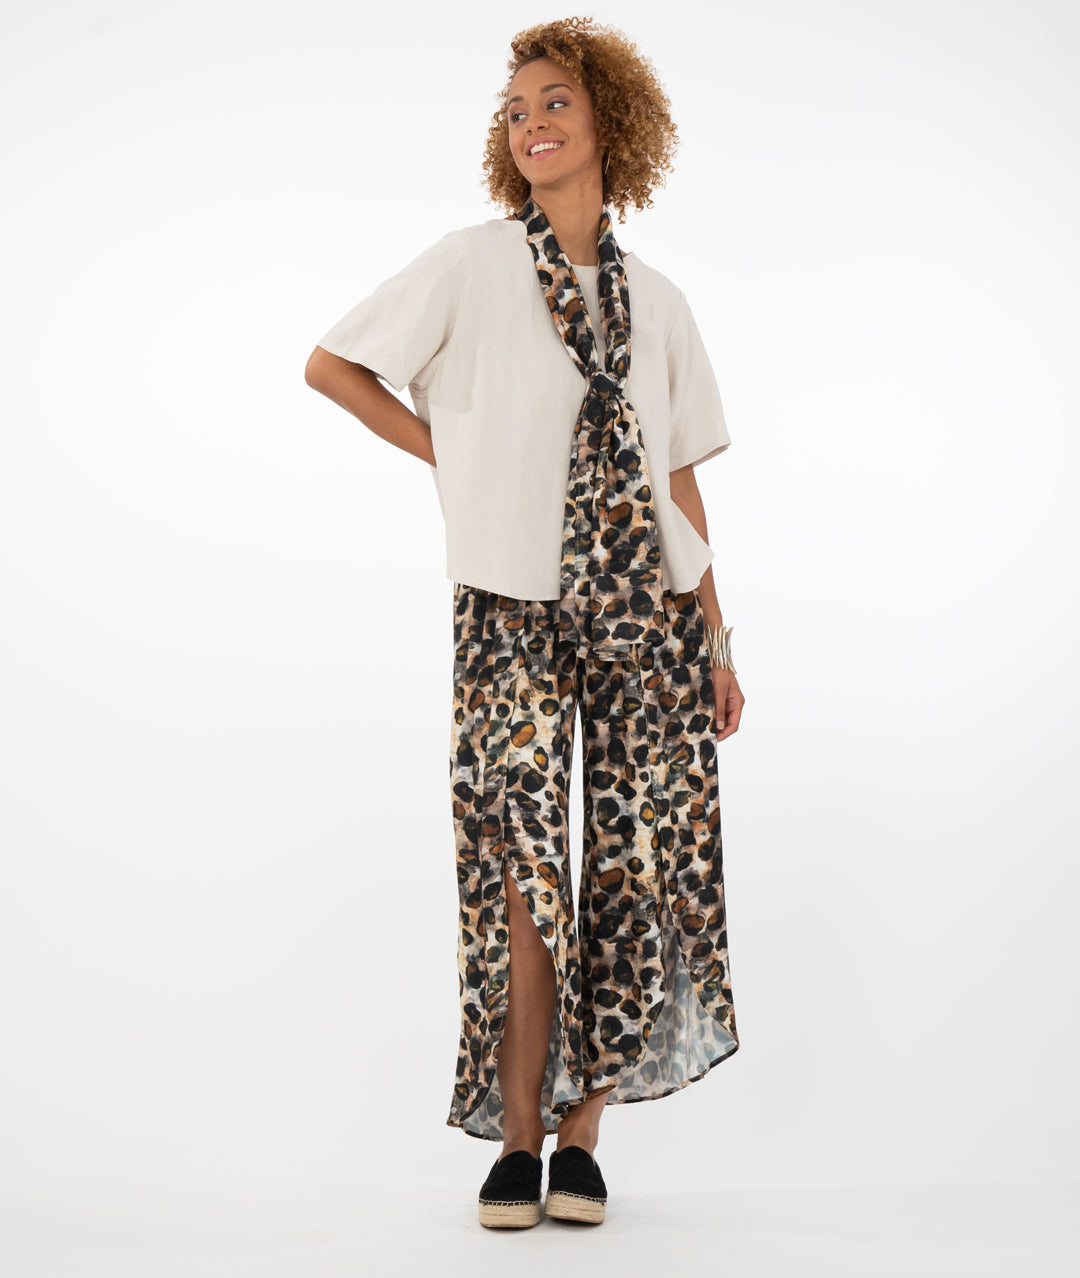 model in a bone colored top with animal print pants and scarf, in front of a white background